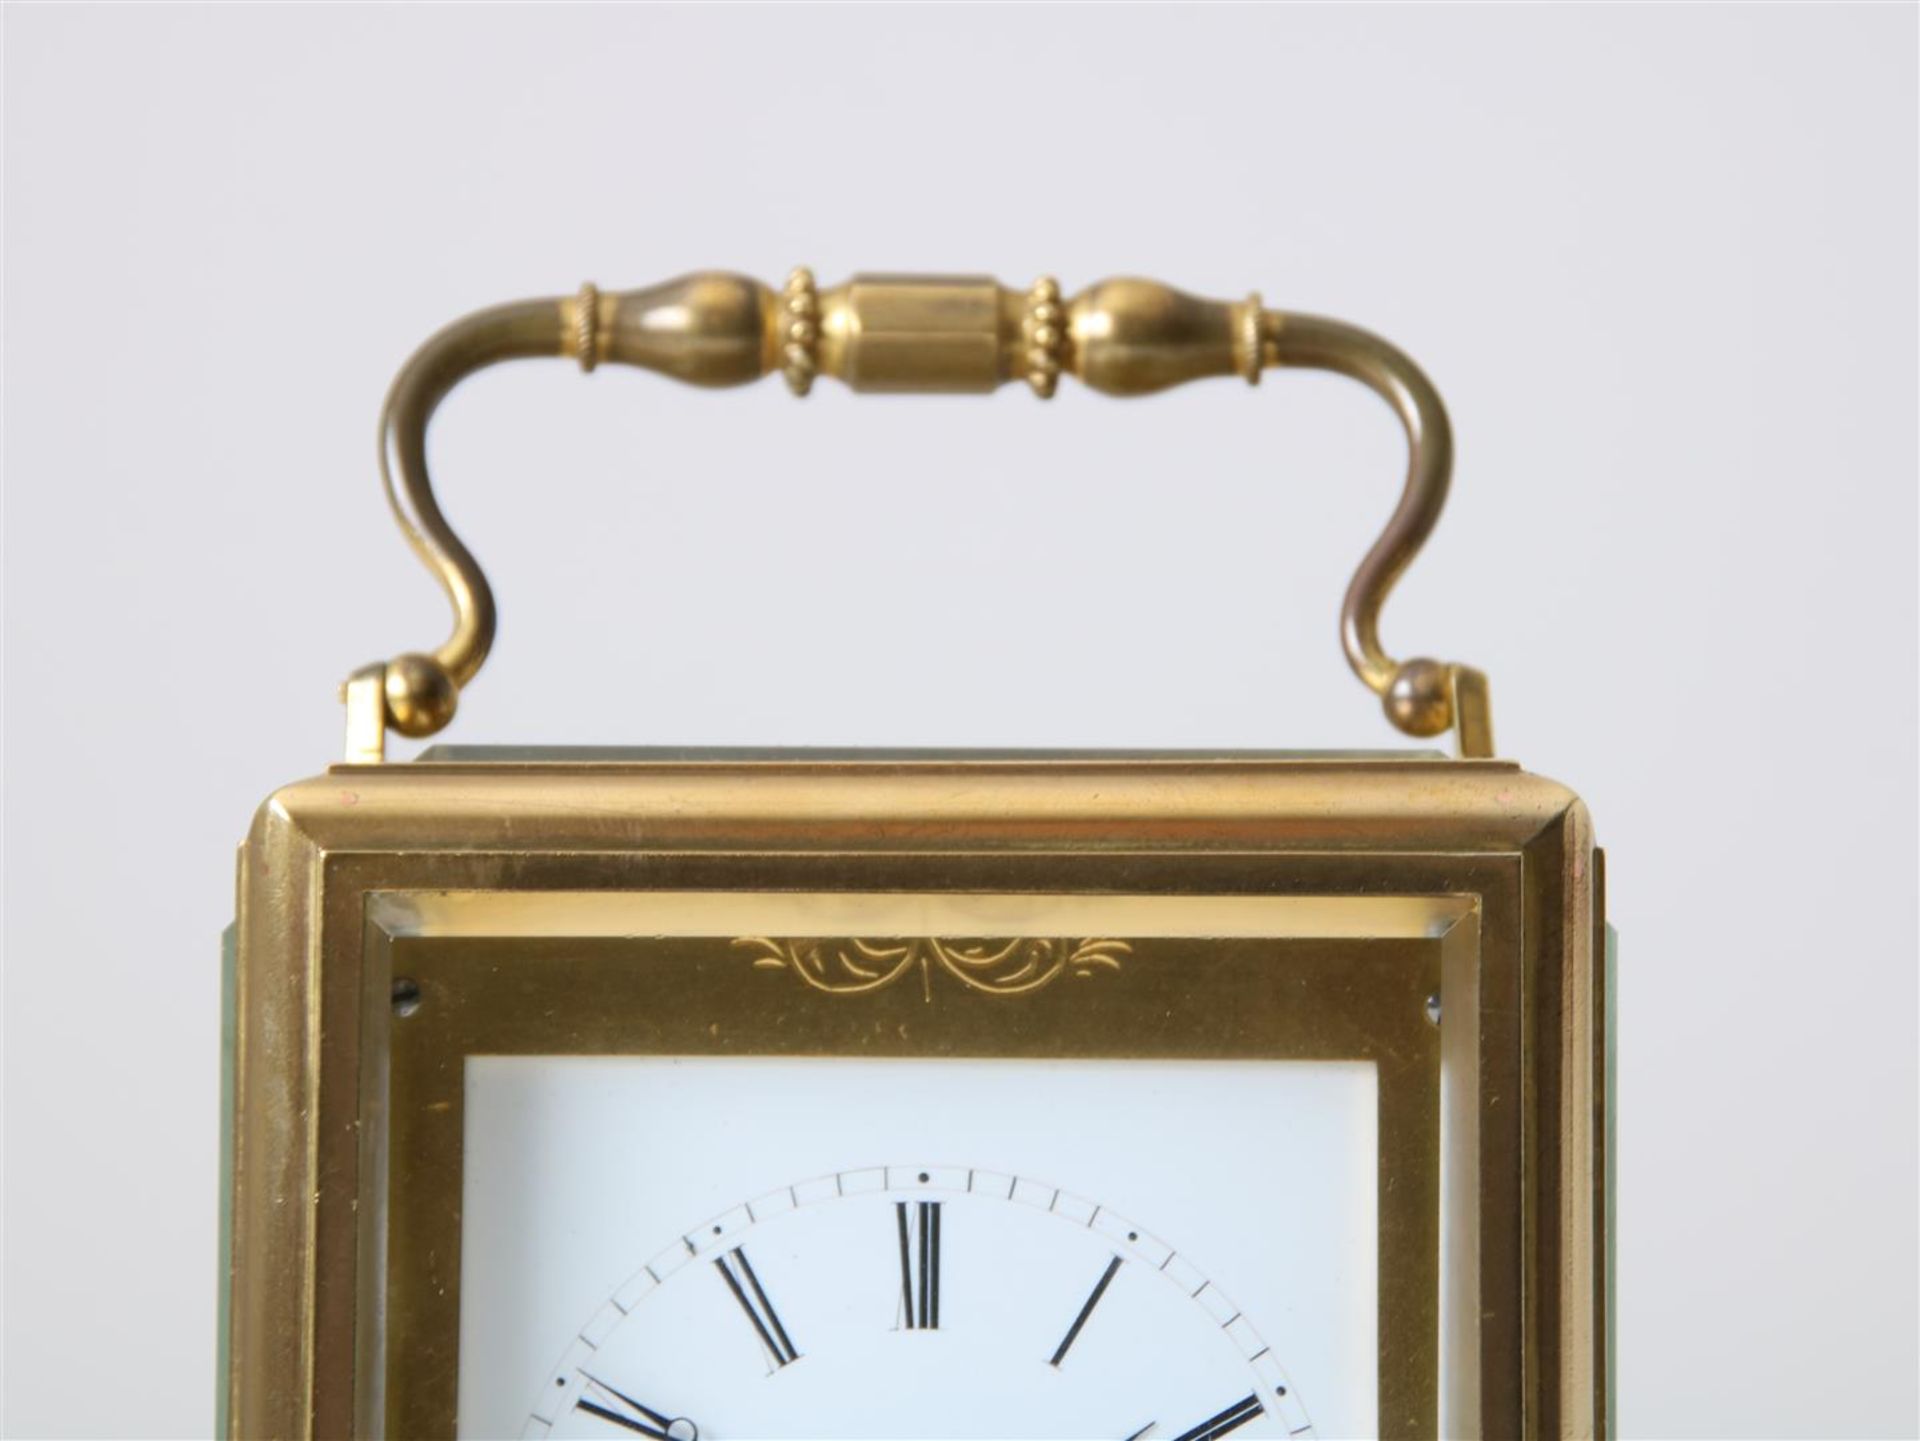 Gilt brass travel clock 'one-piece' with 'Jules escapement', enamel dial with Roman numerals, - Image 3 of 8